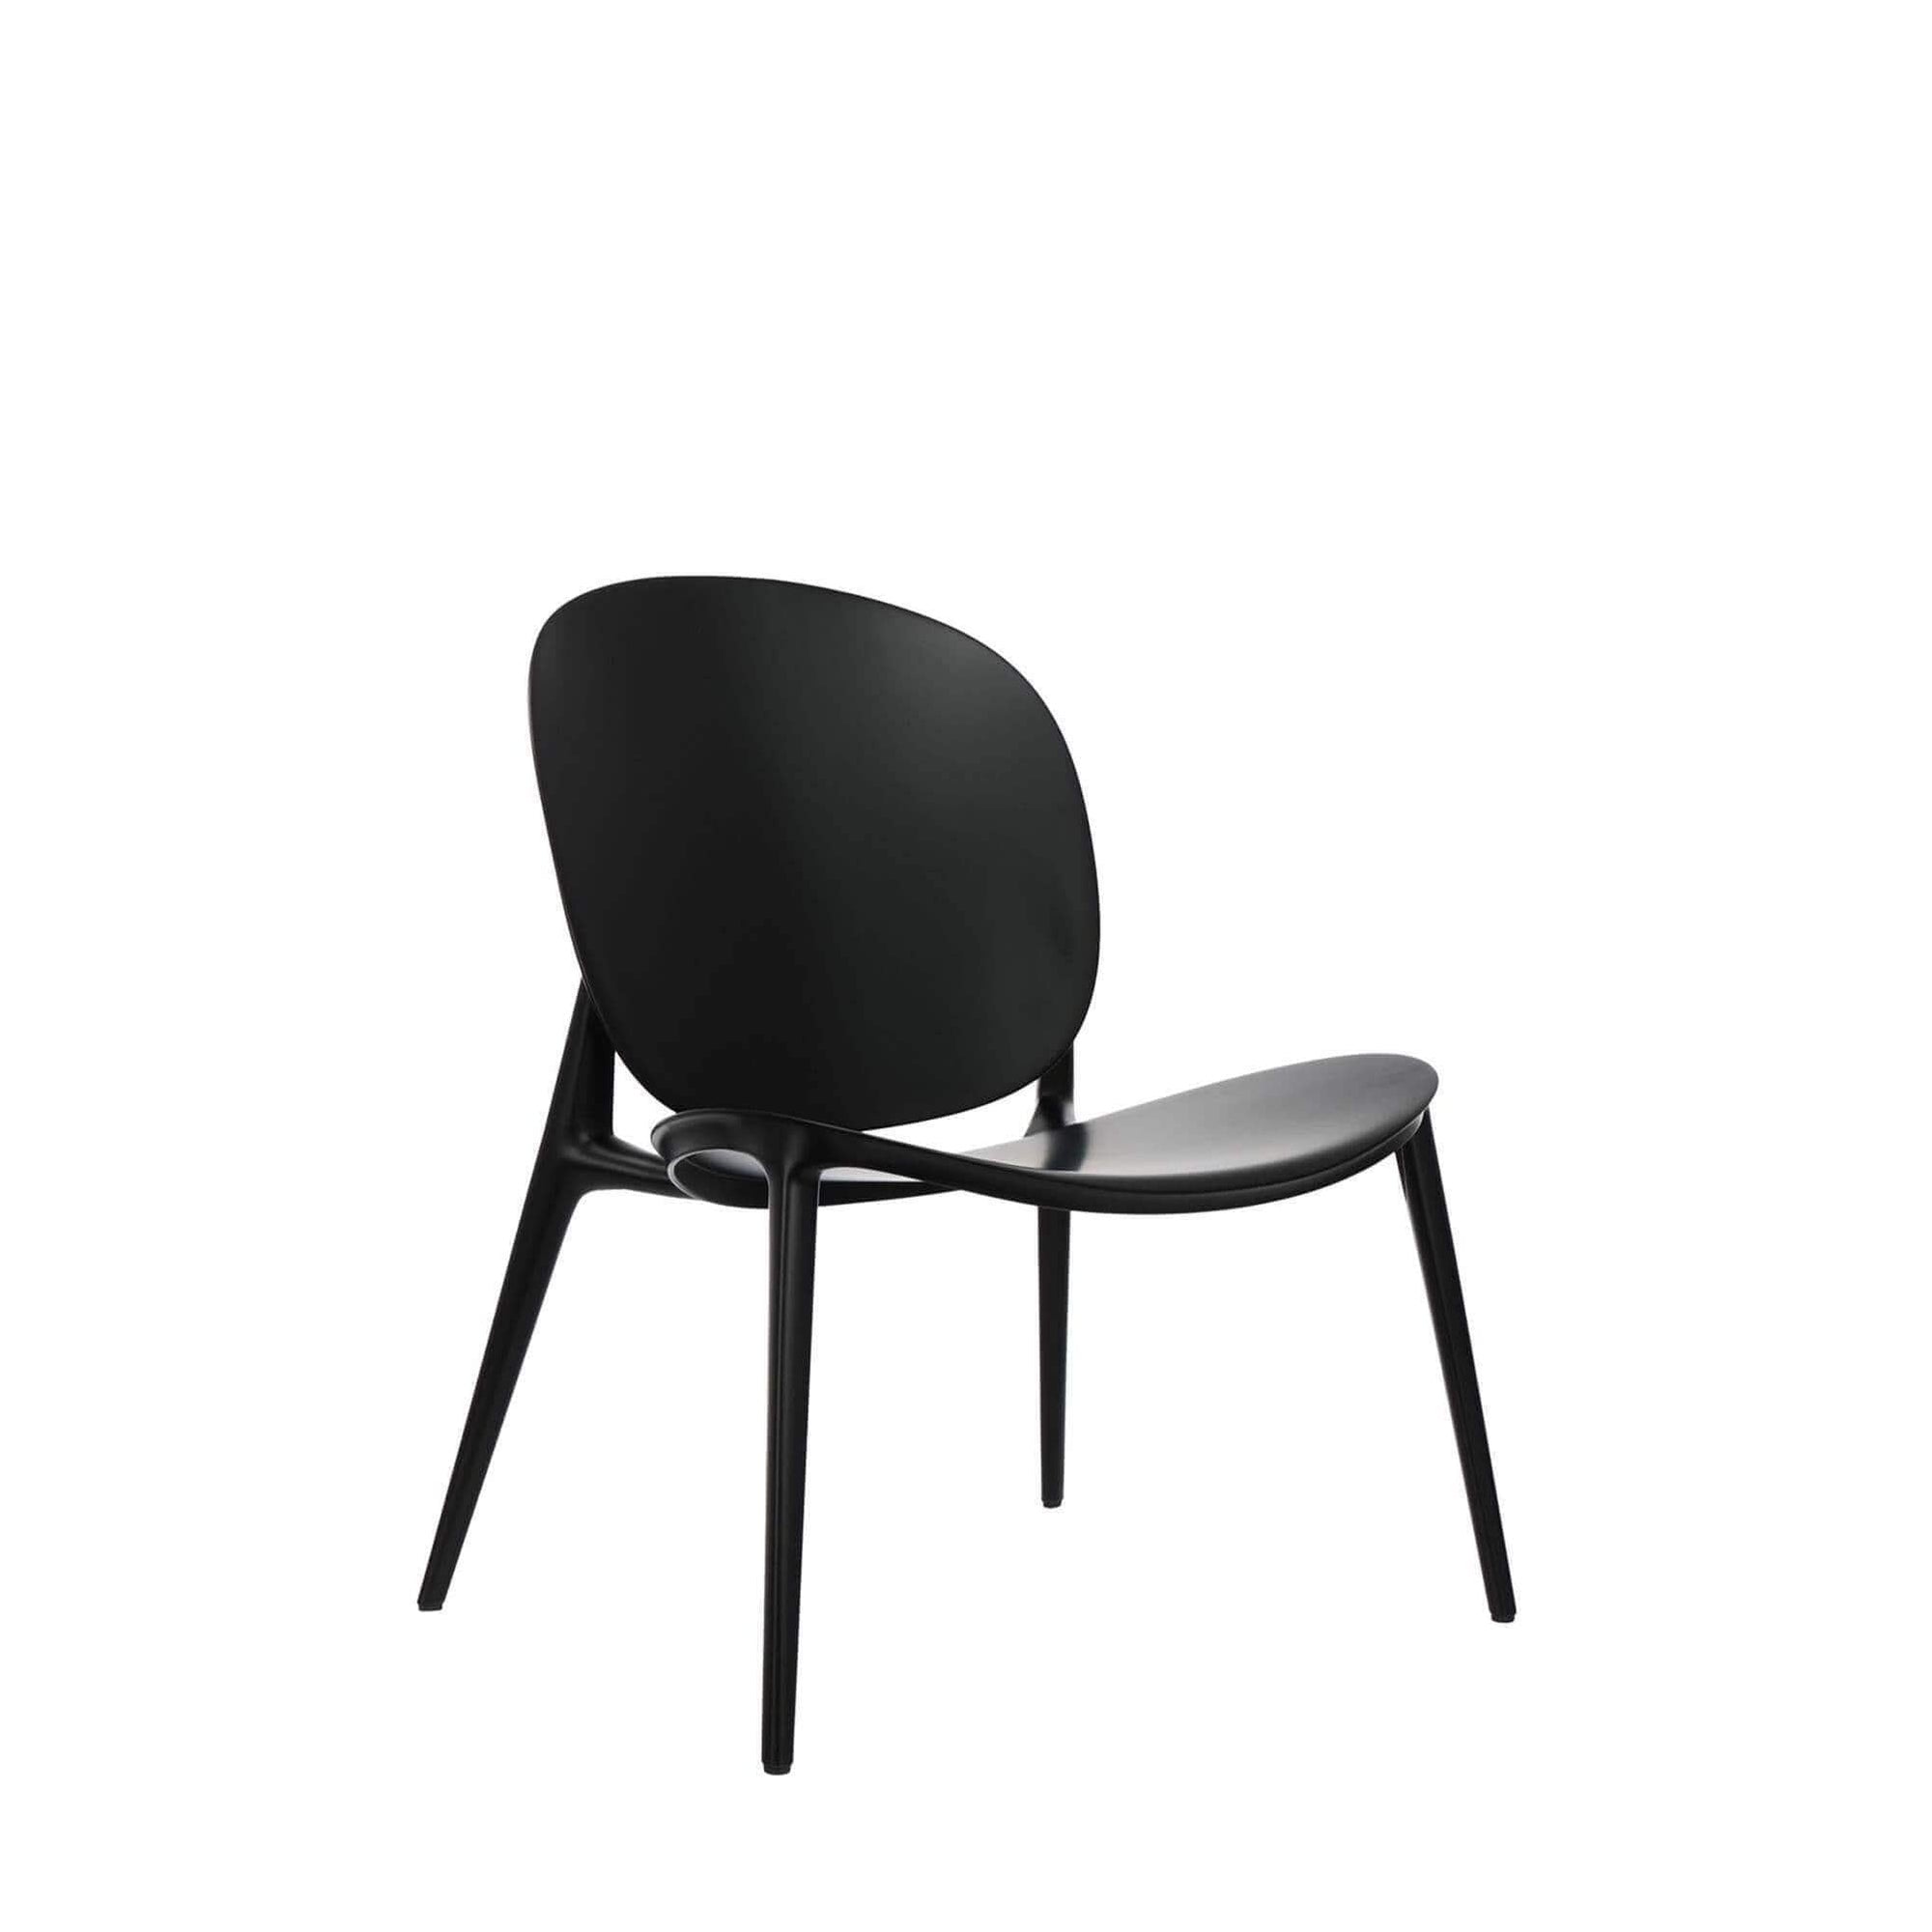 Be Bop Indoor-Outdoor Low Accent Chair - Curated - Furniture - Kartell